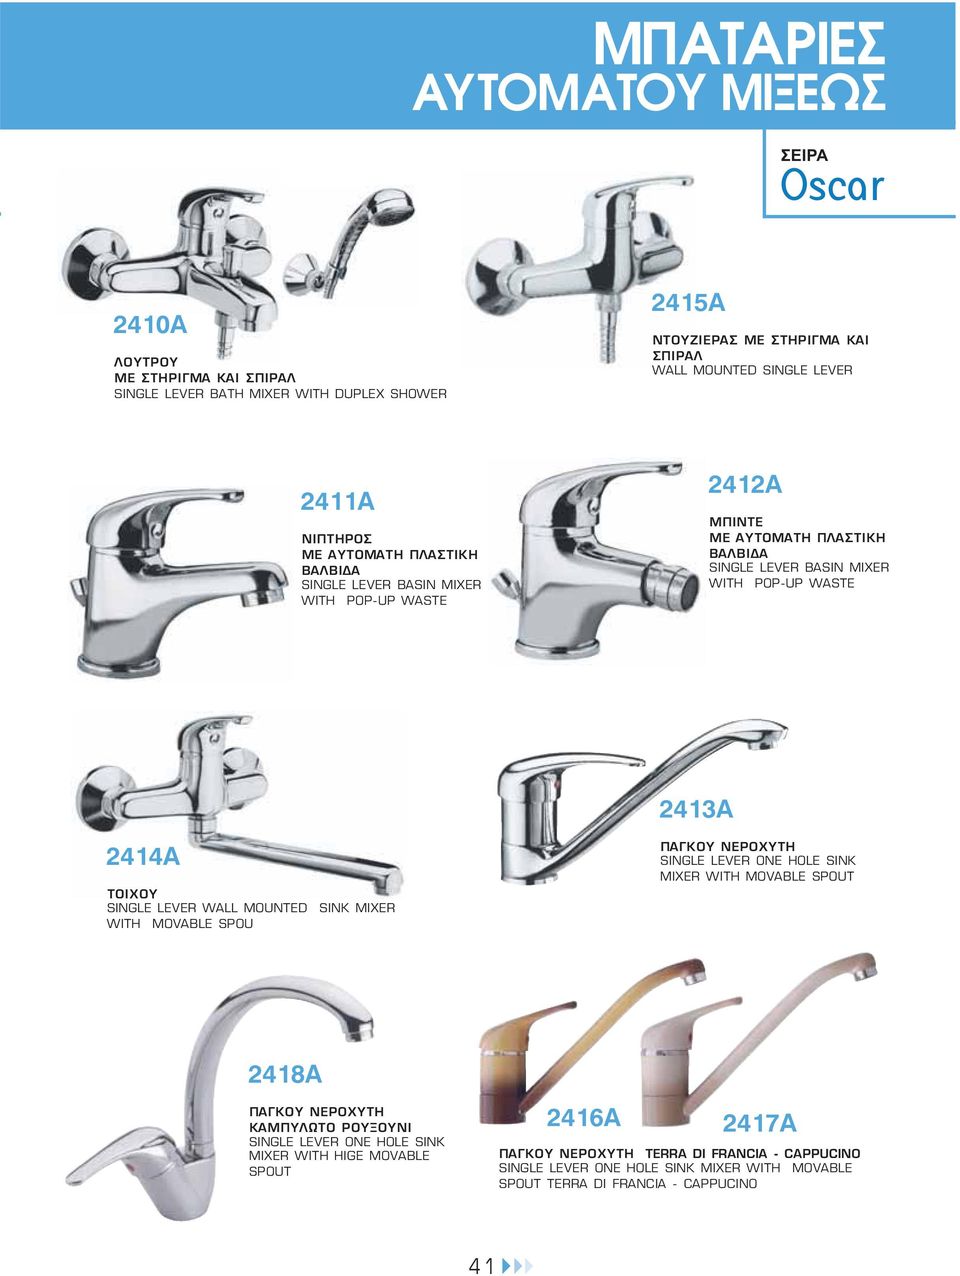 LEVER BASIN MIXER WITH POP-UP 2413A 2414A ΤΟΙΧΟΥ SINGLE LEVER WALL MOUNTED SINK MIXER WITH MOVABLE SPOU MIXER WITH MOVABLE SPOUT 2418A